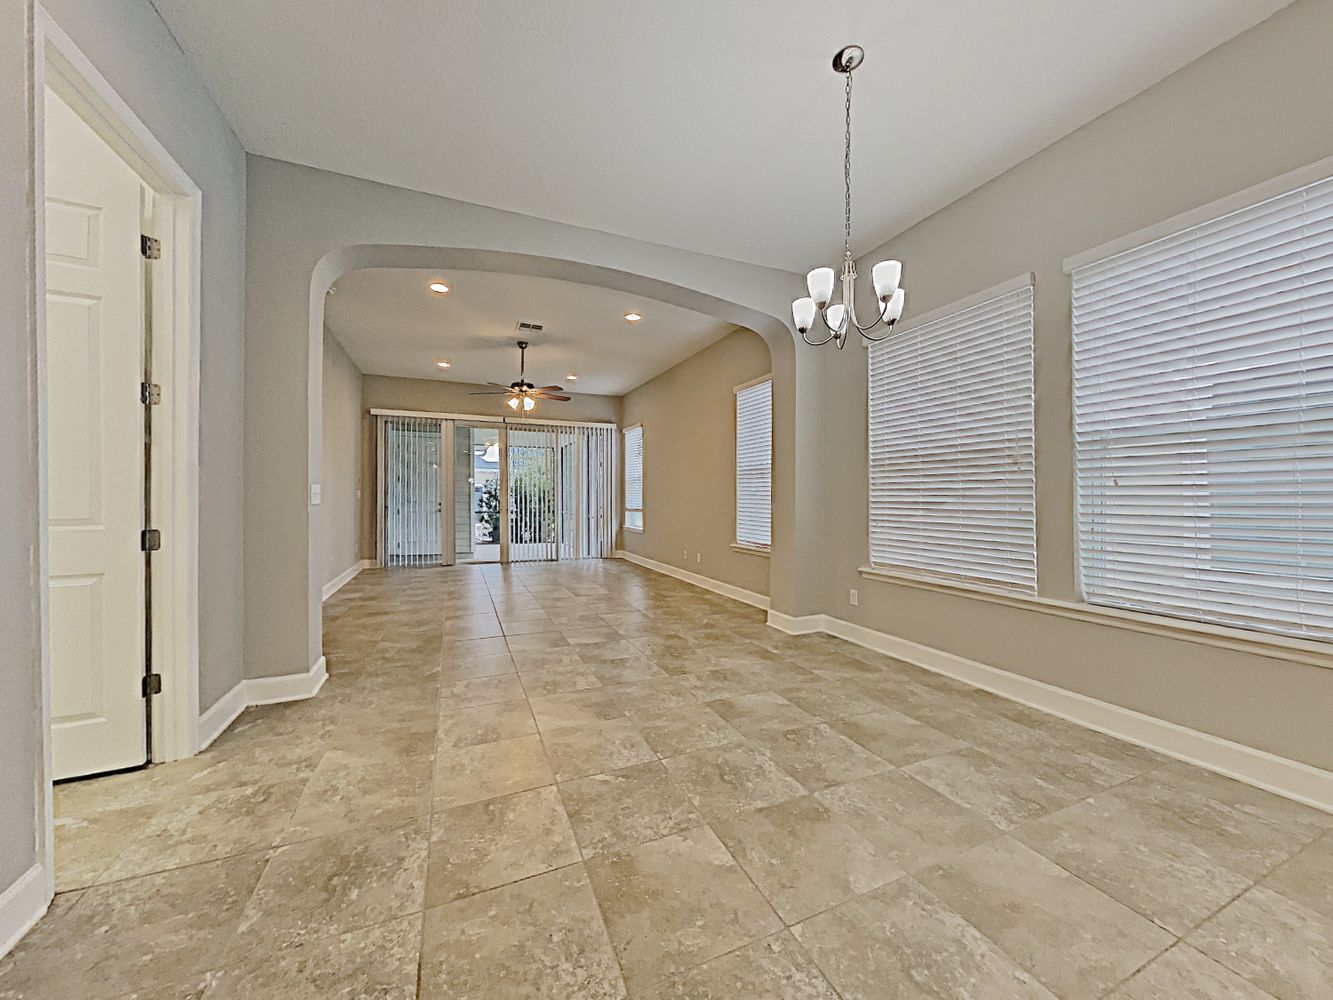 Beautiful living space at Invitation Homes Jacksonville.